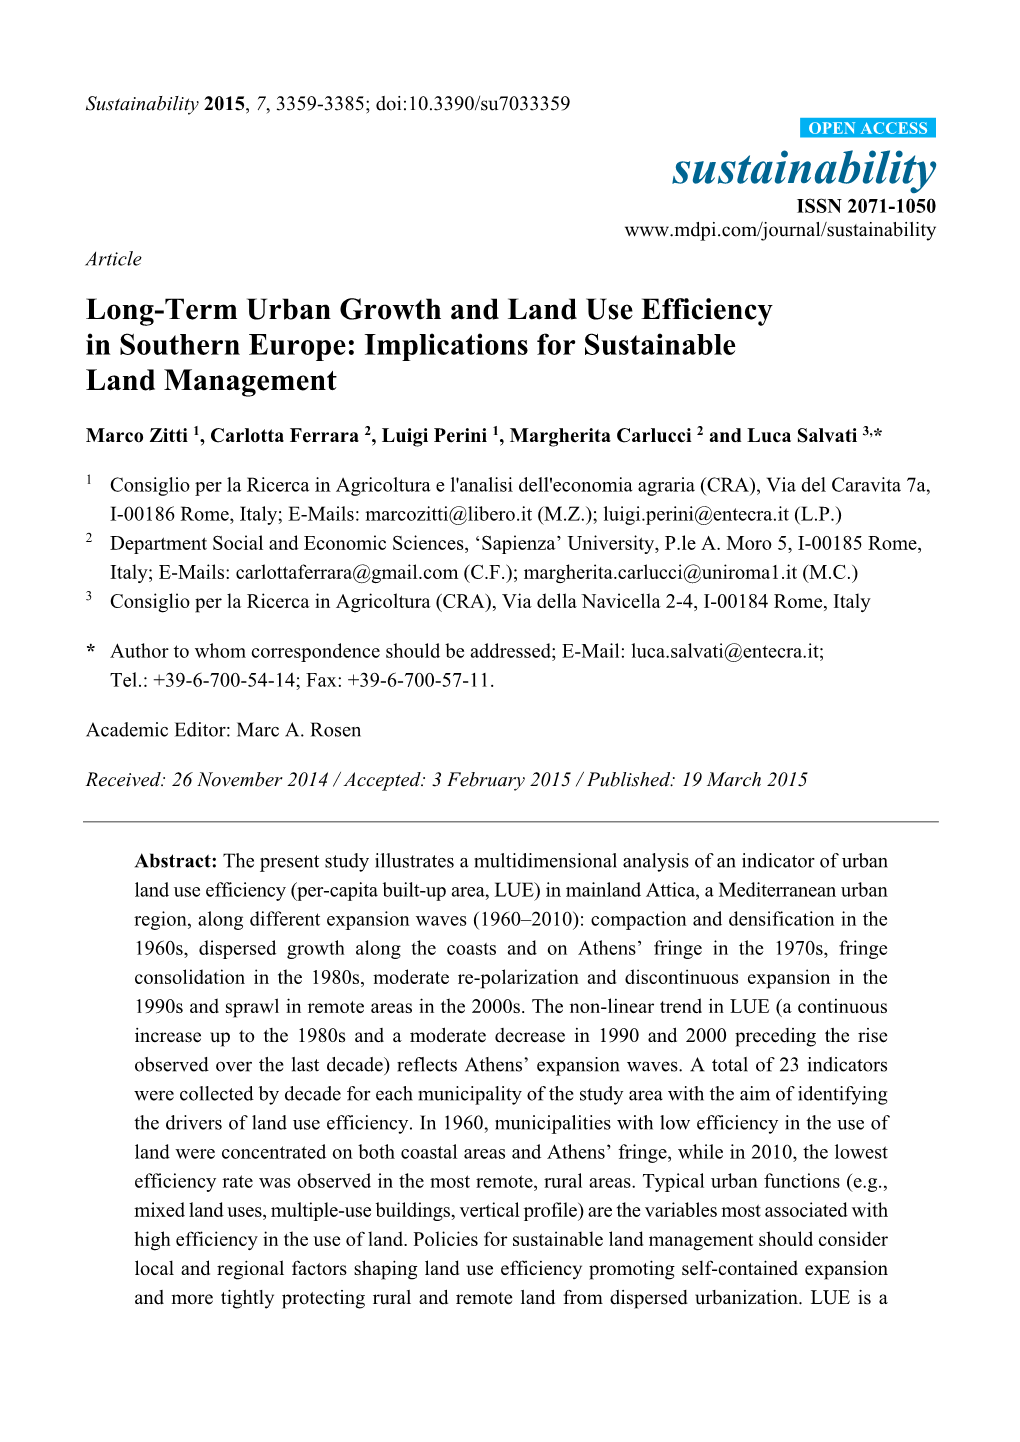 Implications for Sustainable Land Management